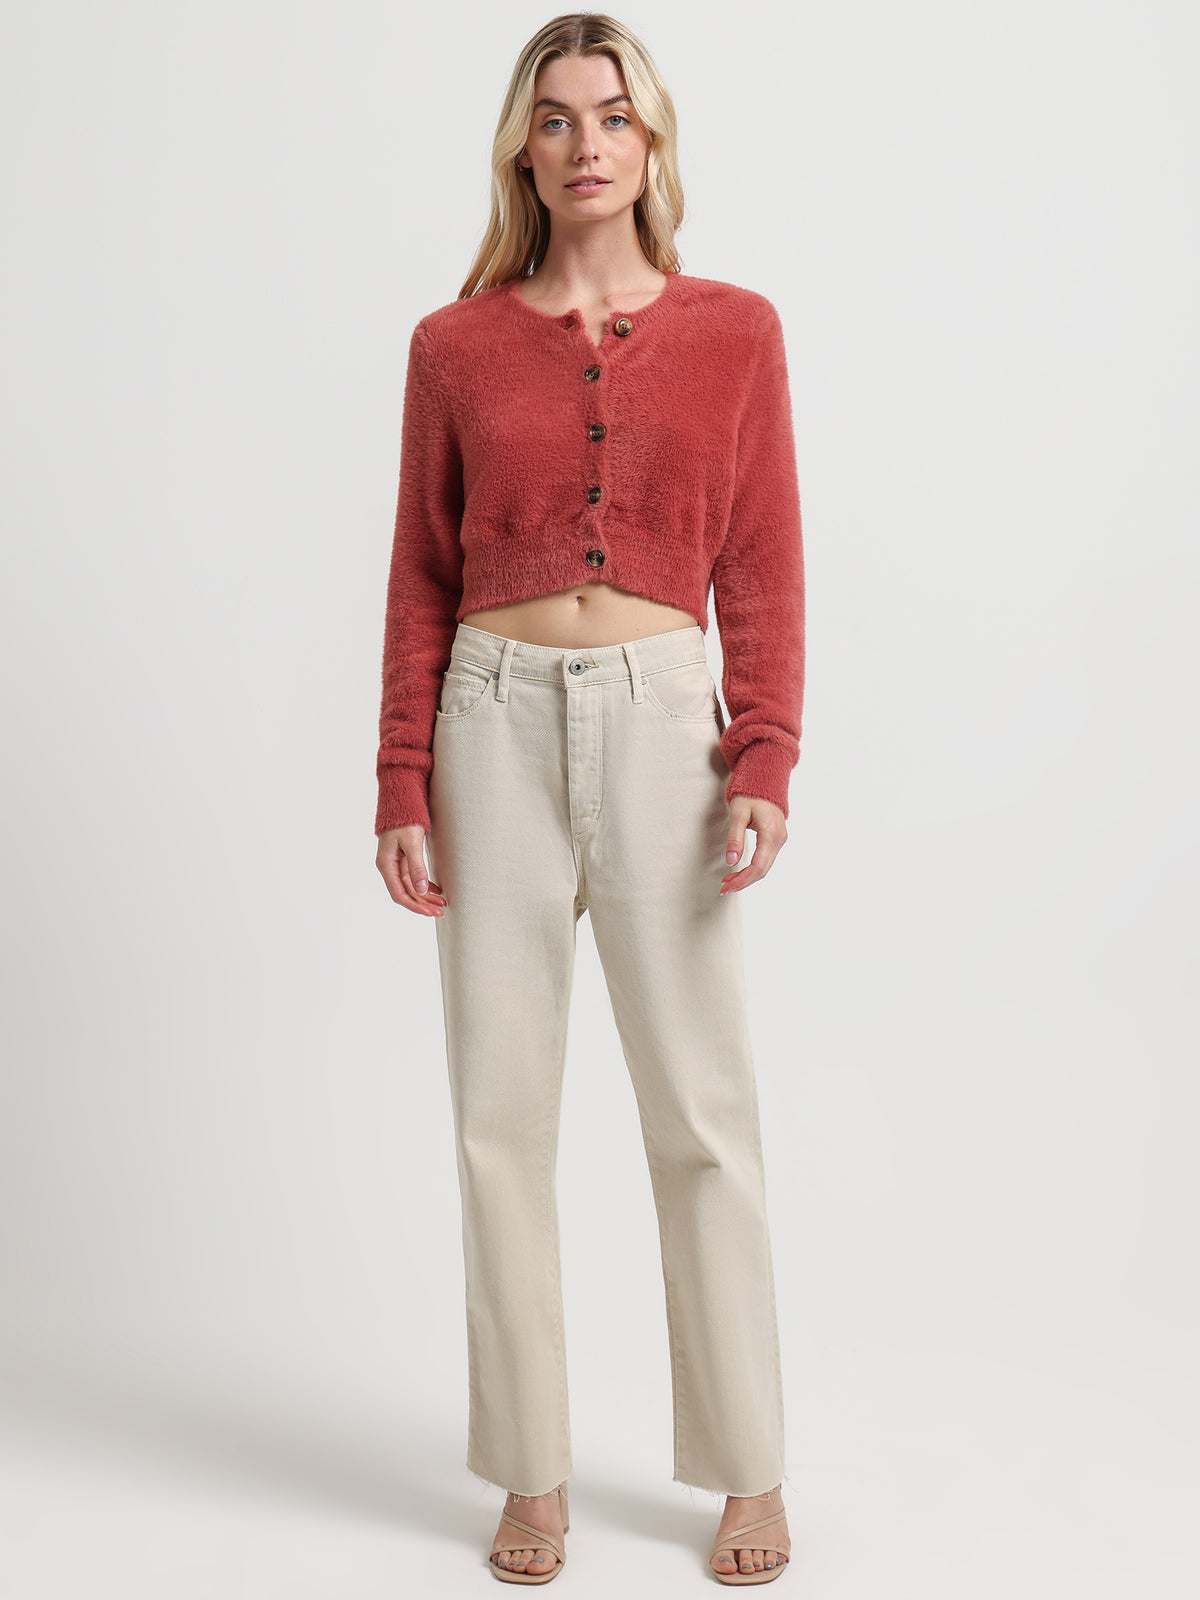 High Nina Cropped Jeans in Natural